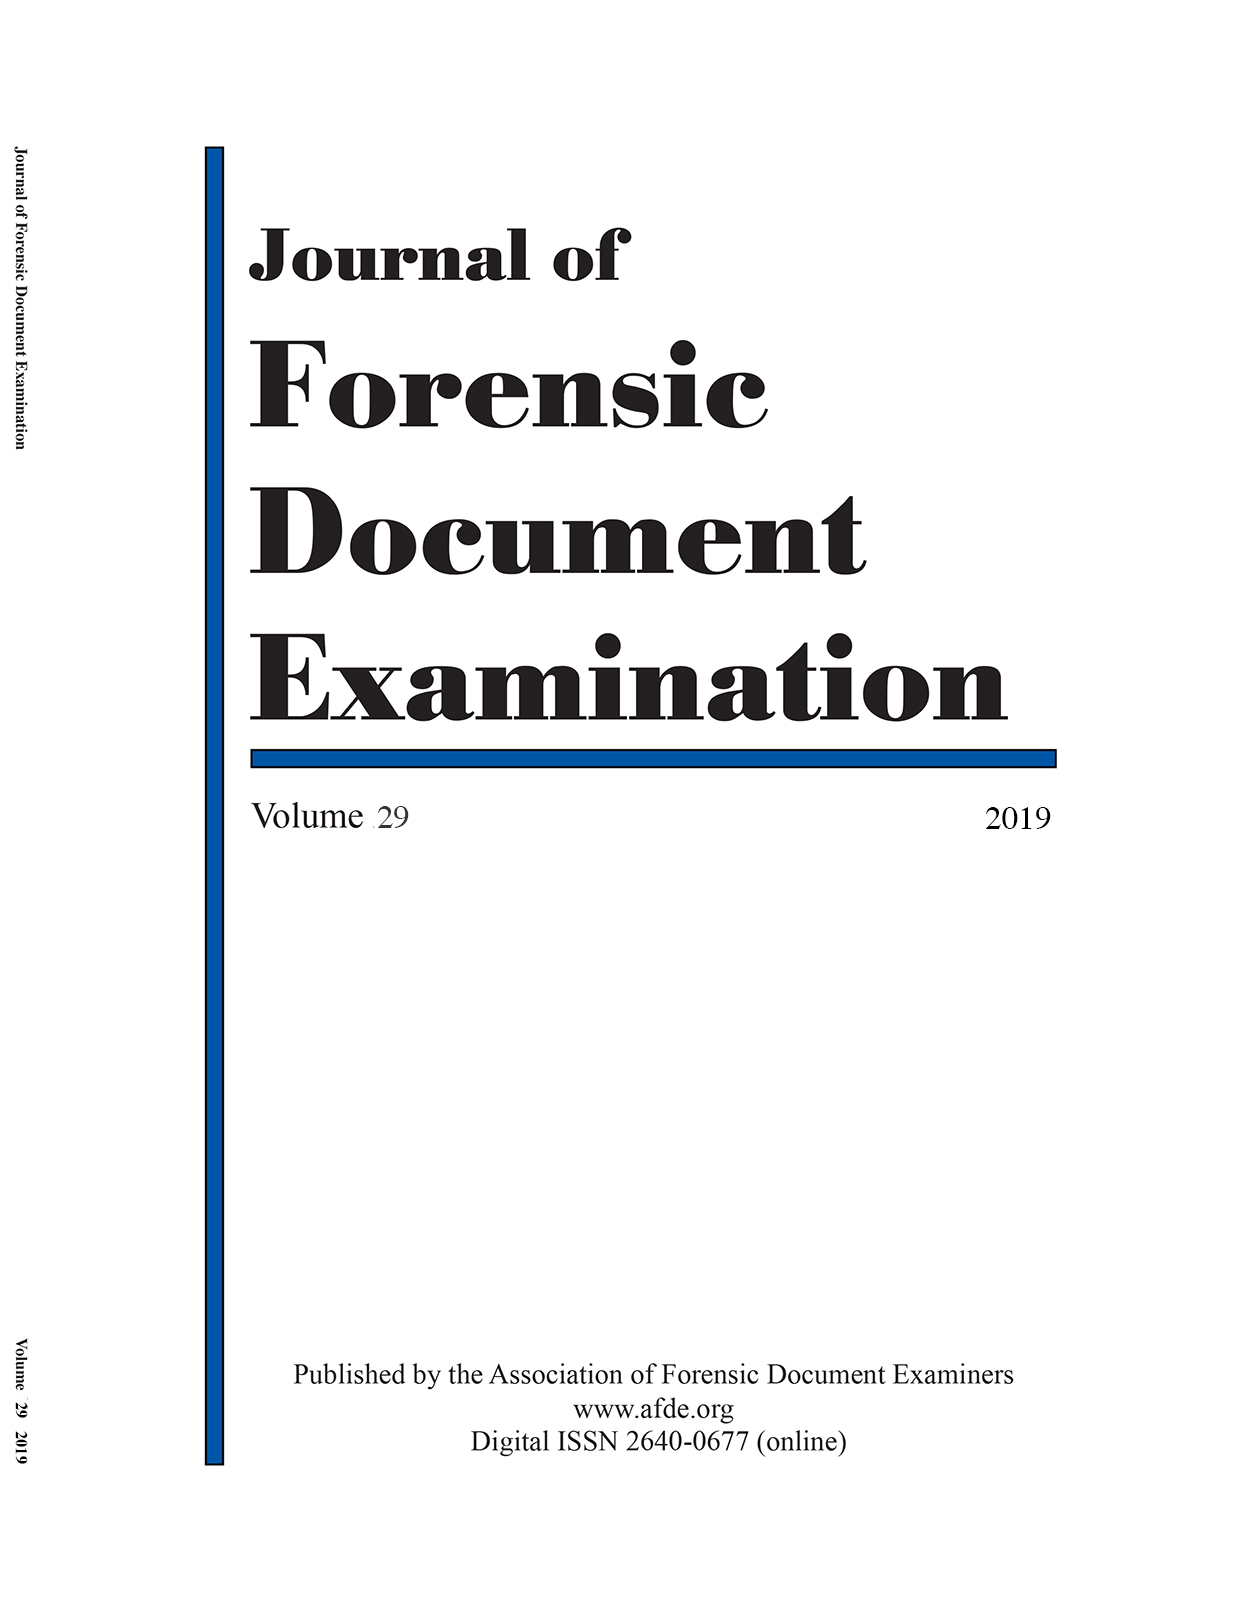 					View Vol. 29 (2019): Journal of Forensic Document Examination - 2019
				